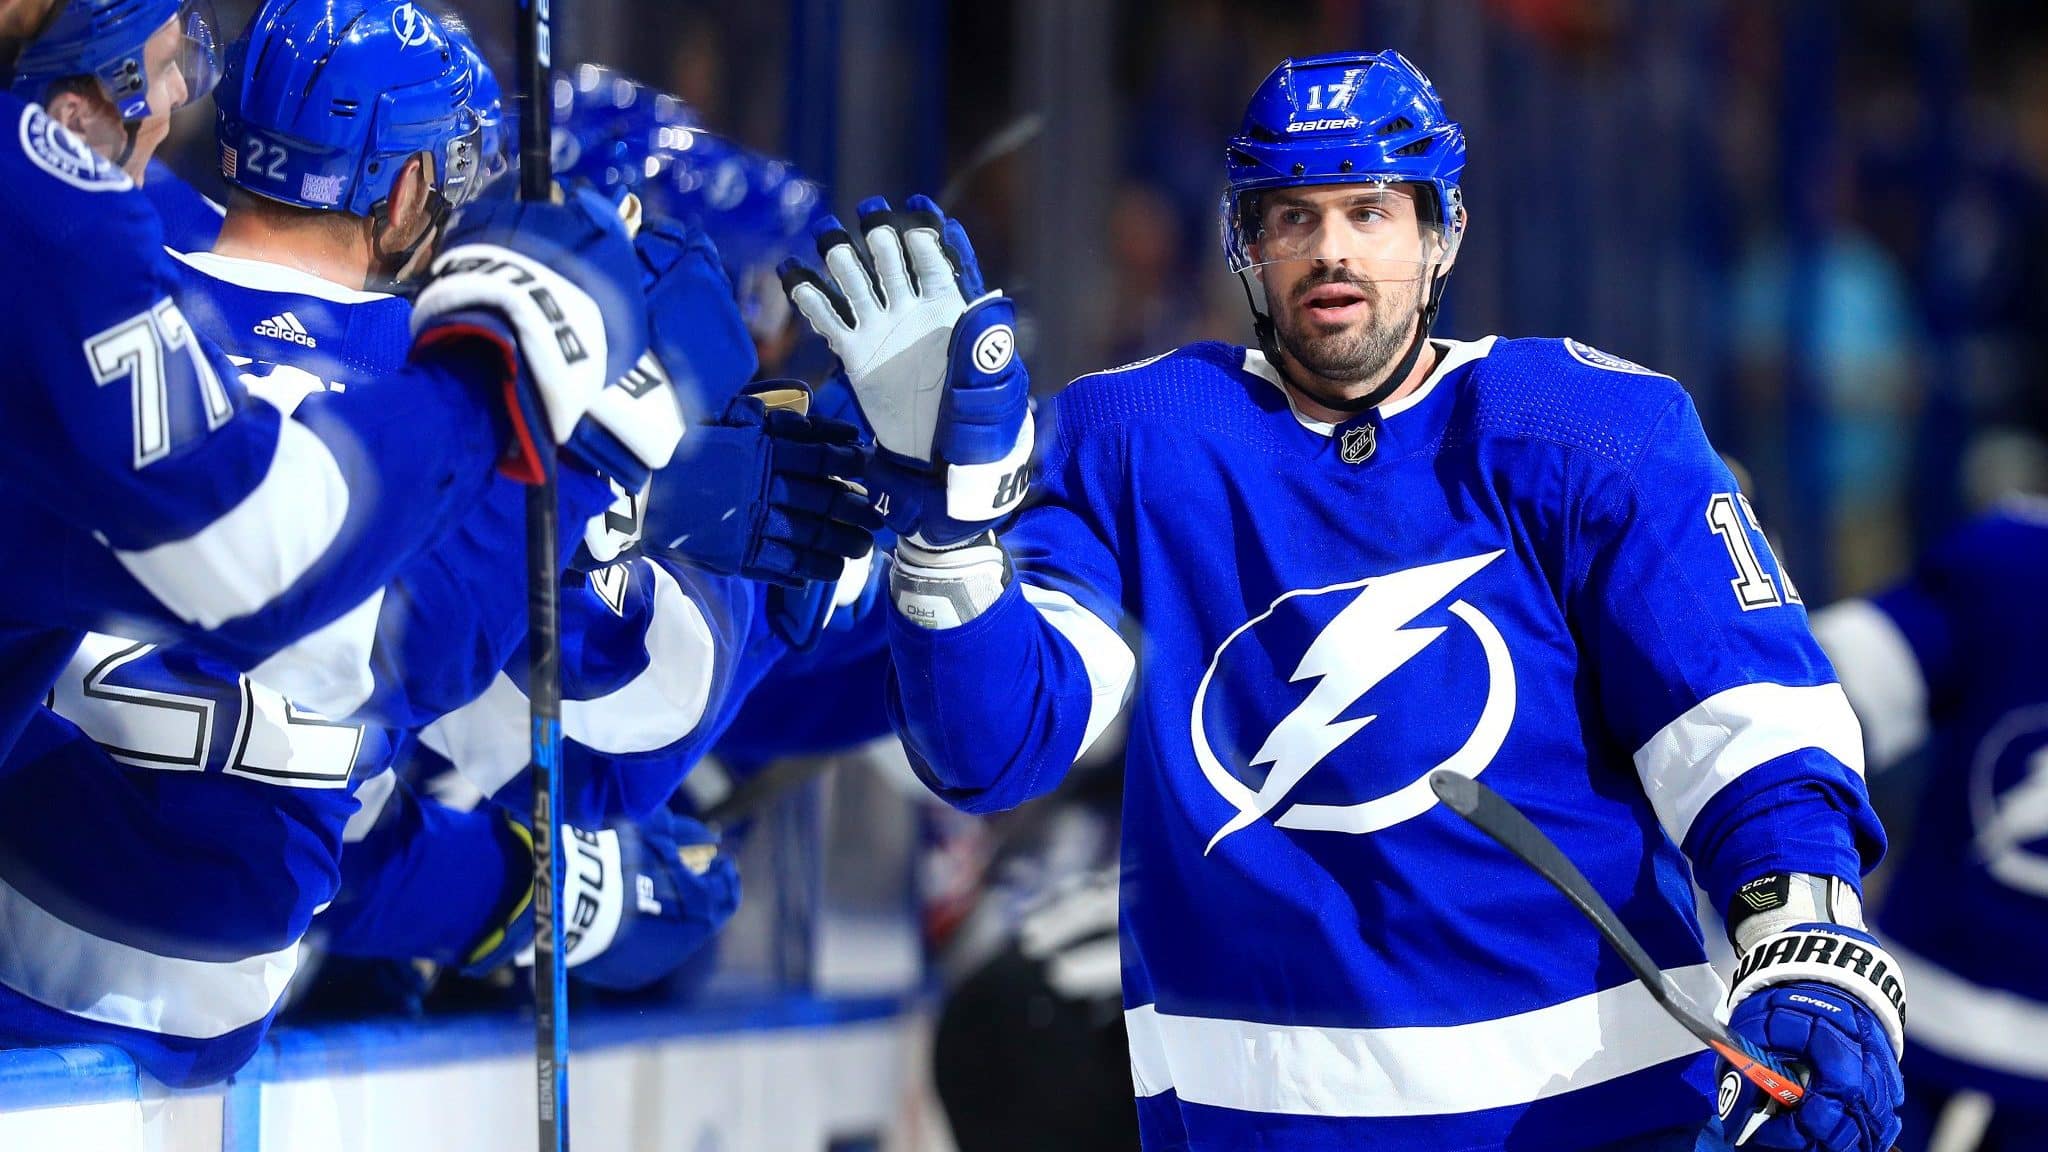 TAMPA, FLORIDA - NOVEMBER 14: Alex Killorn #17 of the Tampa Bay Lightning celebrates a goal during a game against the New York Rangers at Amalie Arena on November 14, 2019 in Tampa, Florida.